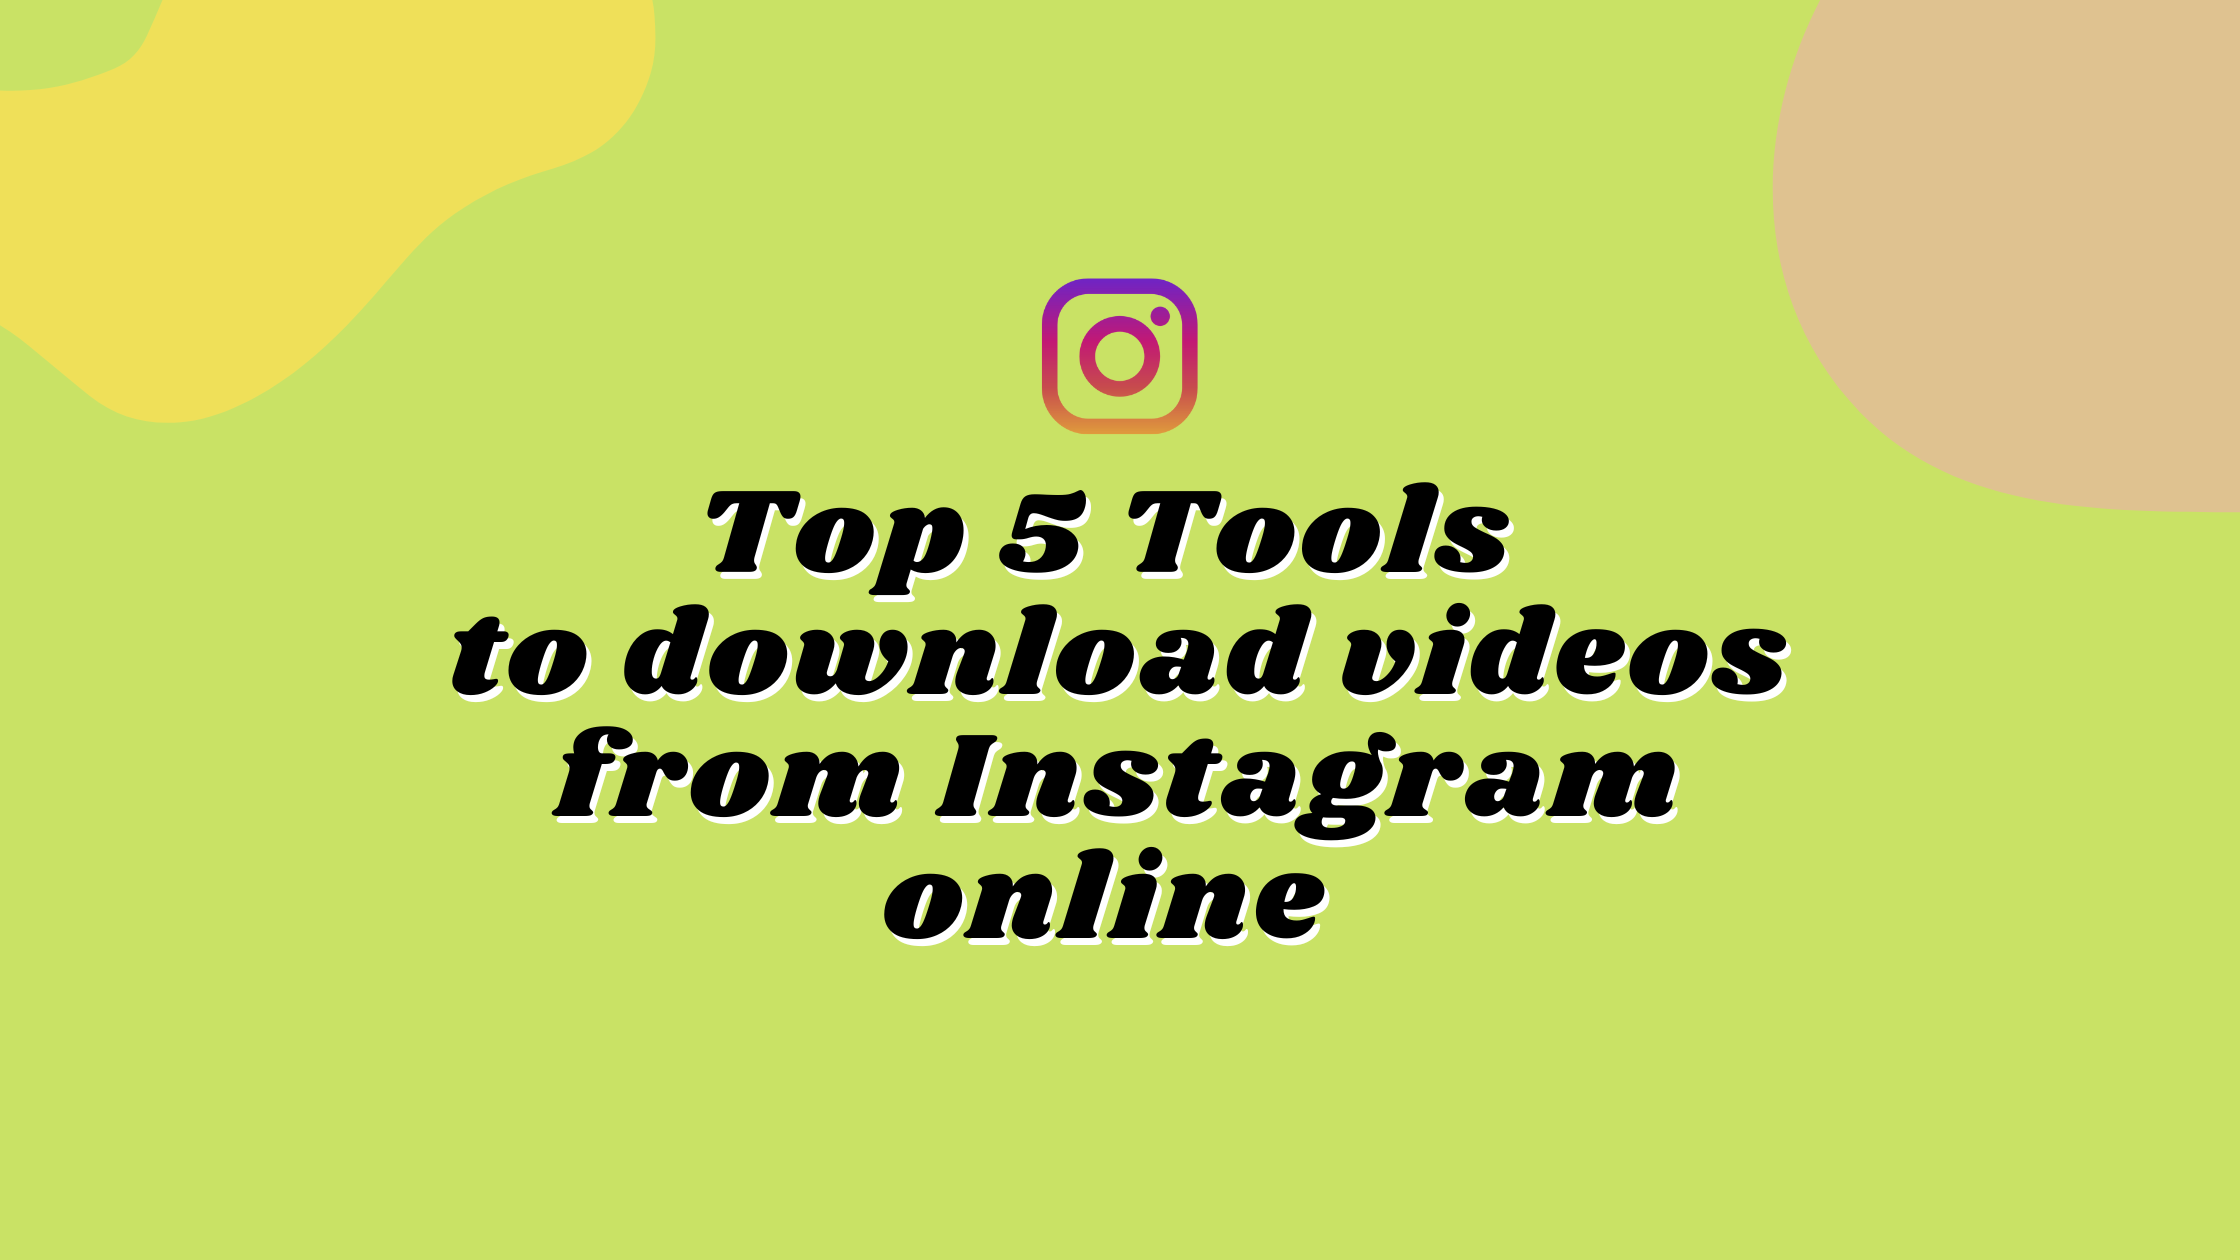 Top 5 tools to download videos from Instagram online